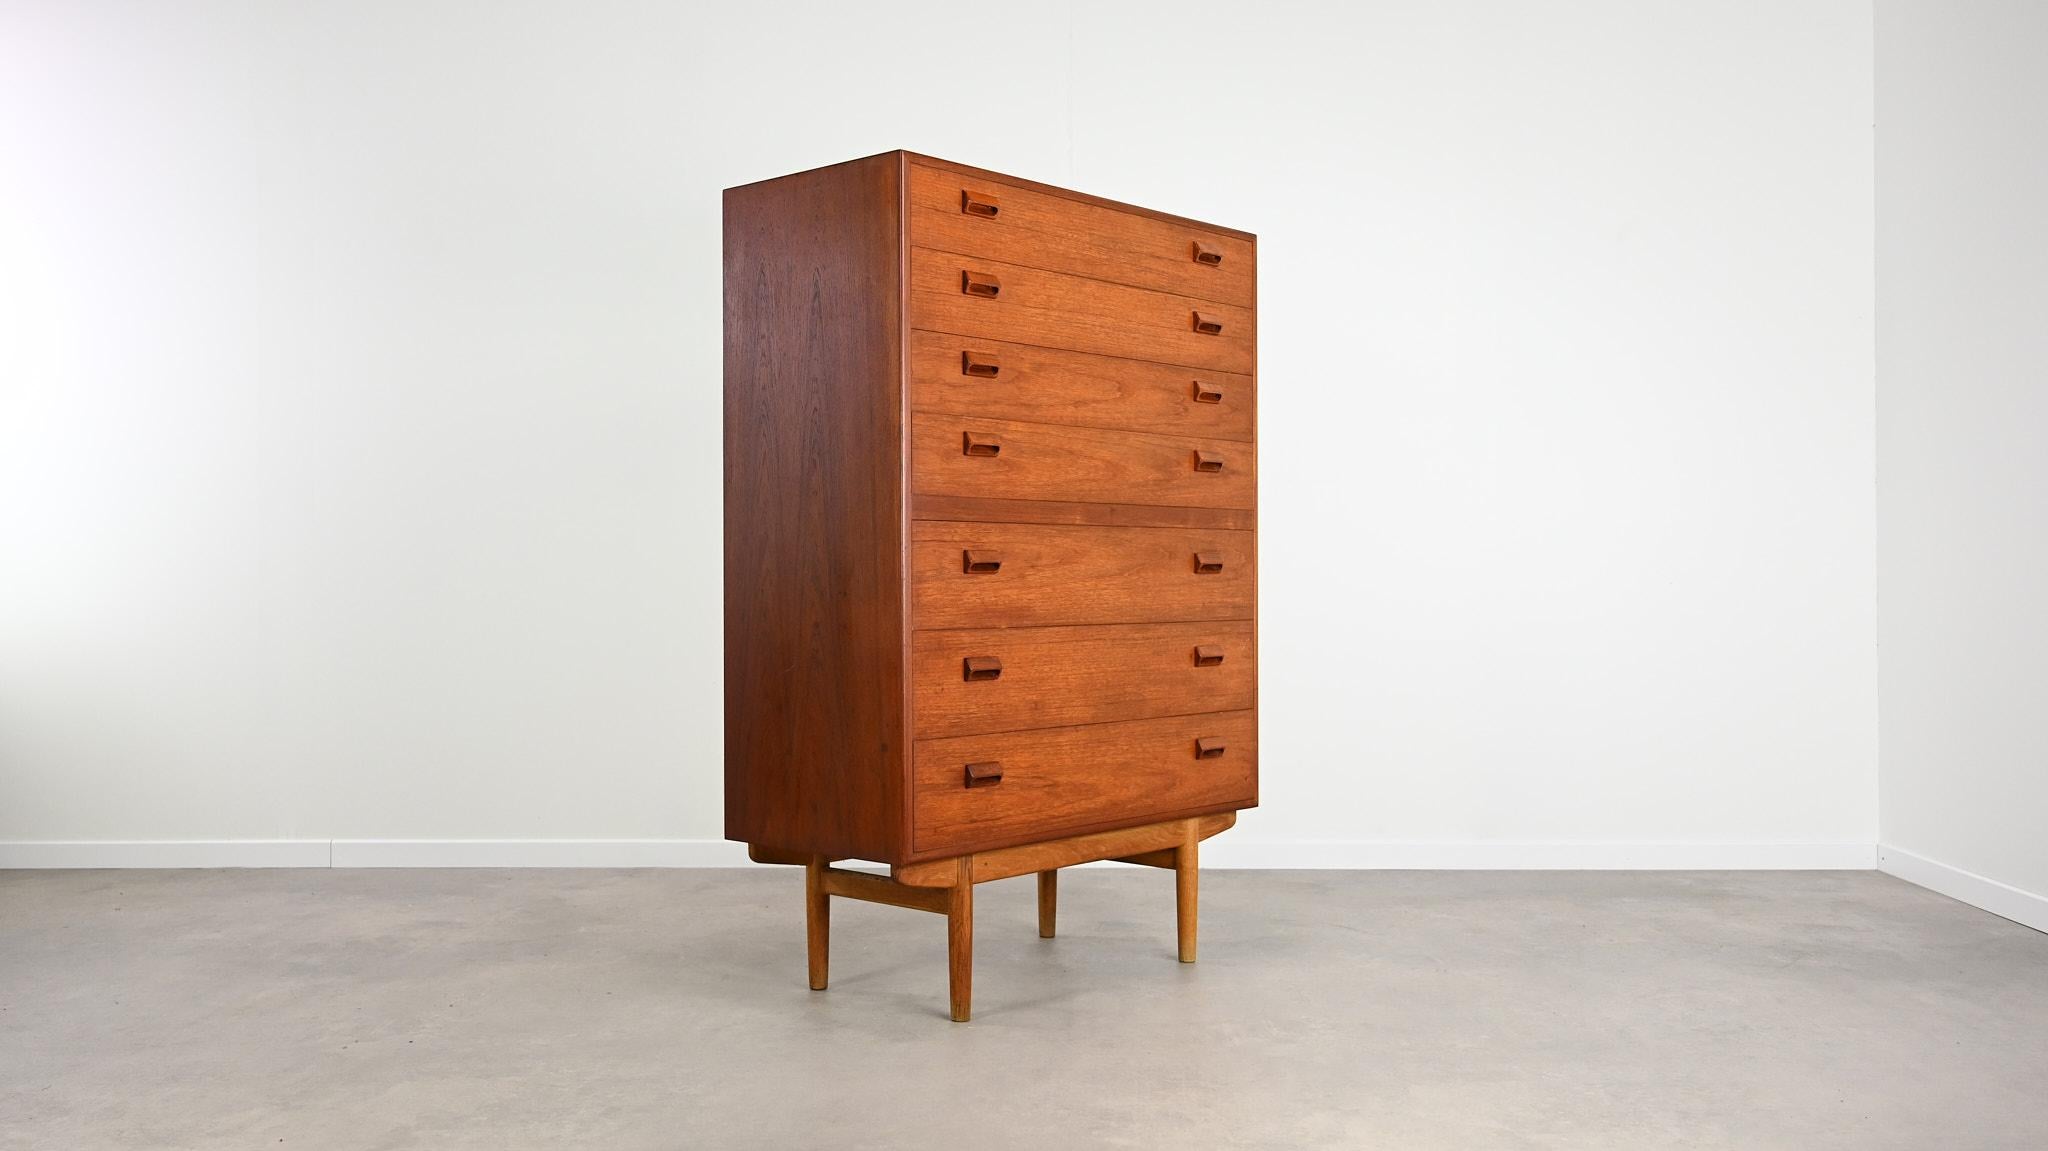 Designed by Børge Mogensen and manufactured by Søborg Møbelfabrik in the 1960s in Denmark, this chest of drawers is made of teak and teak veneer resting on an oak base. It opens by seven drawers on the front and surprises with its oversized